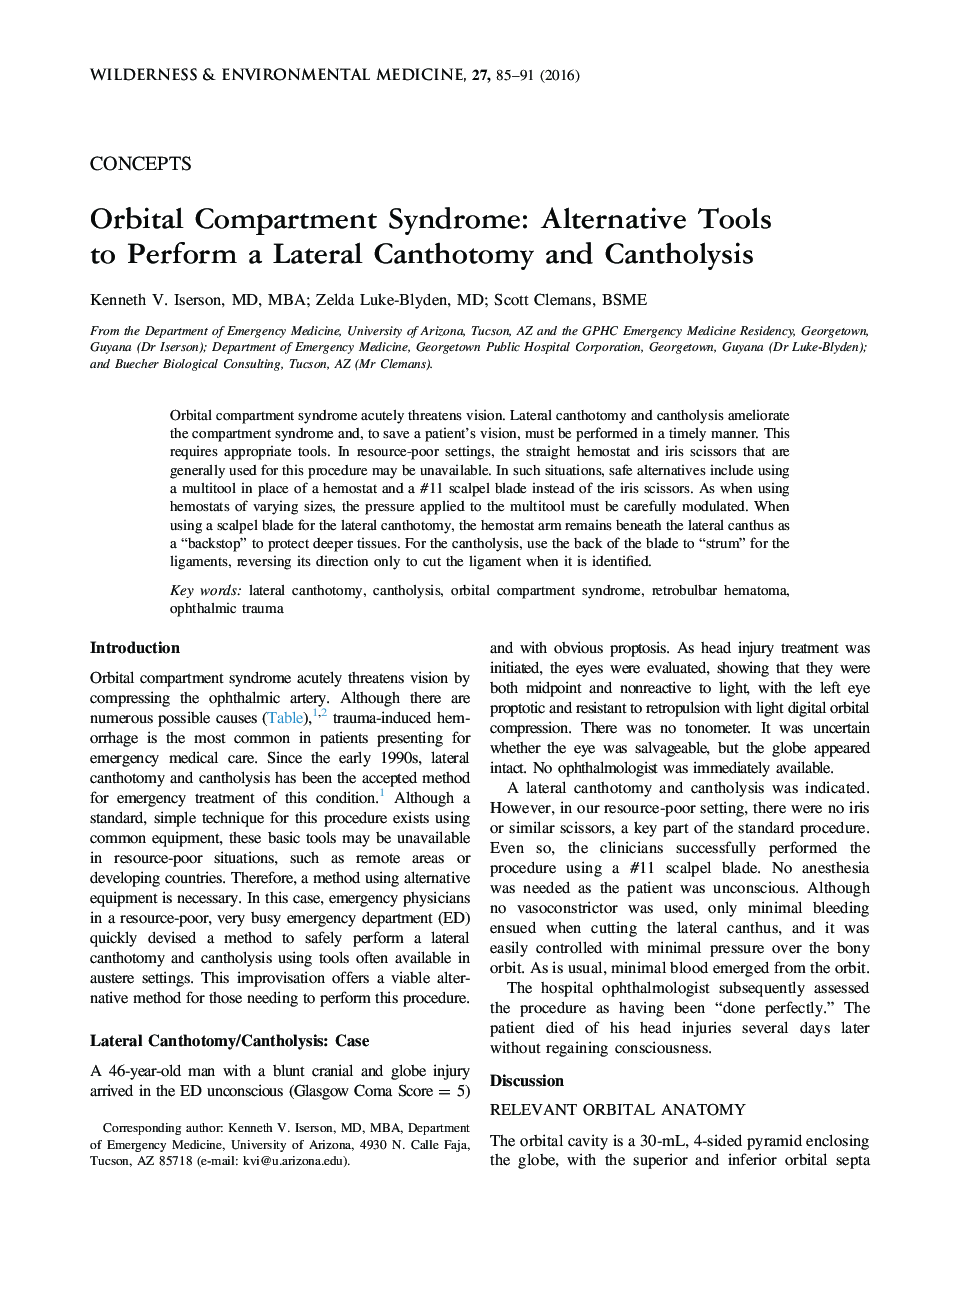 Orbital Compartment Syndrome: Alternative Tools to Perform a Lateral Canthotomy and Cantholysis